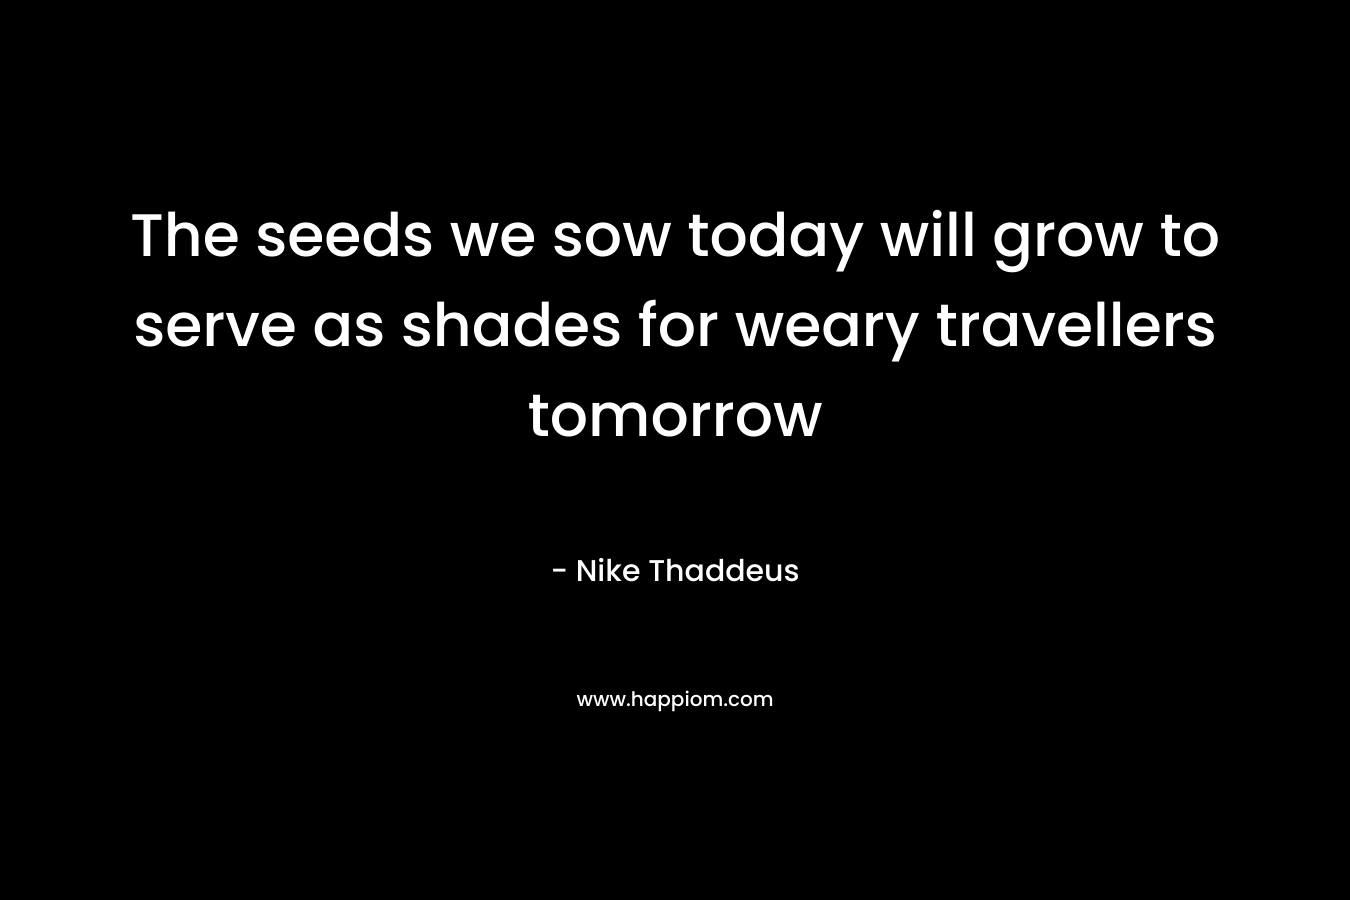 The seeds we sow today will grow to serve as shades for weary travellers tomorrow